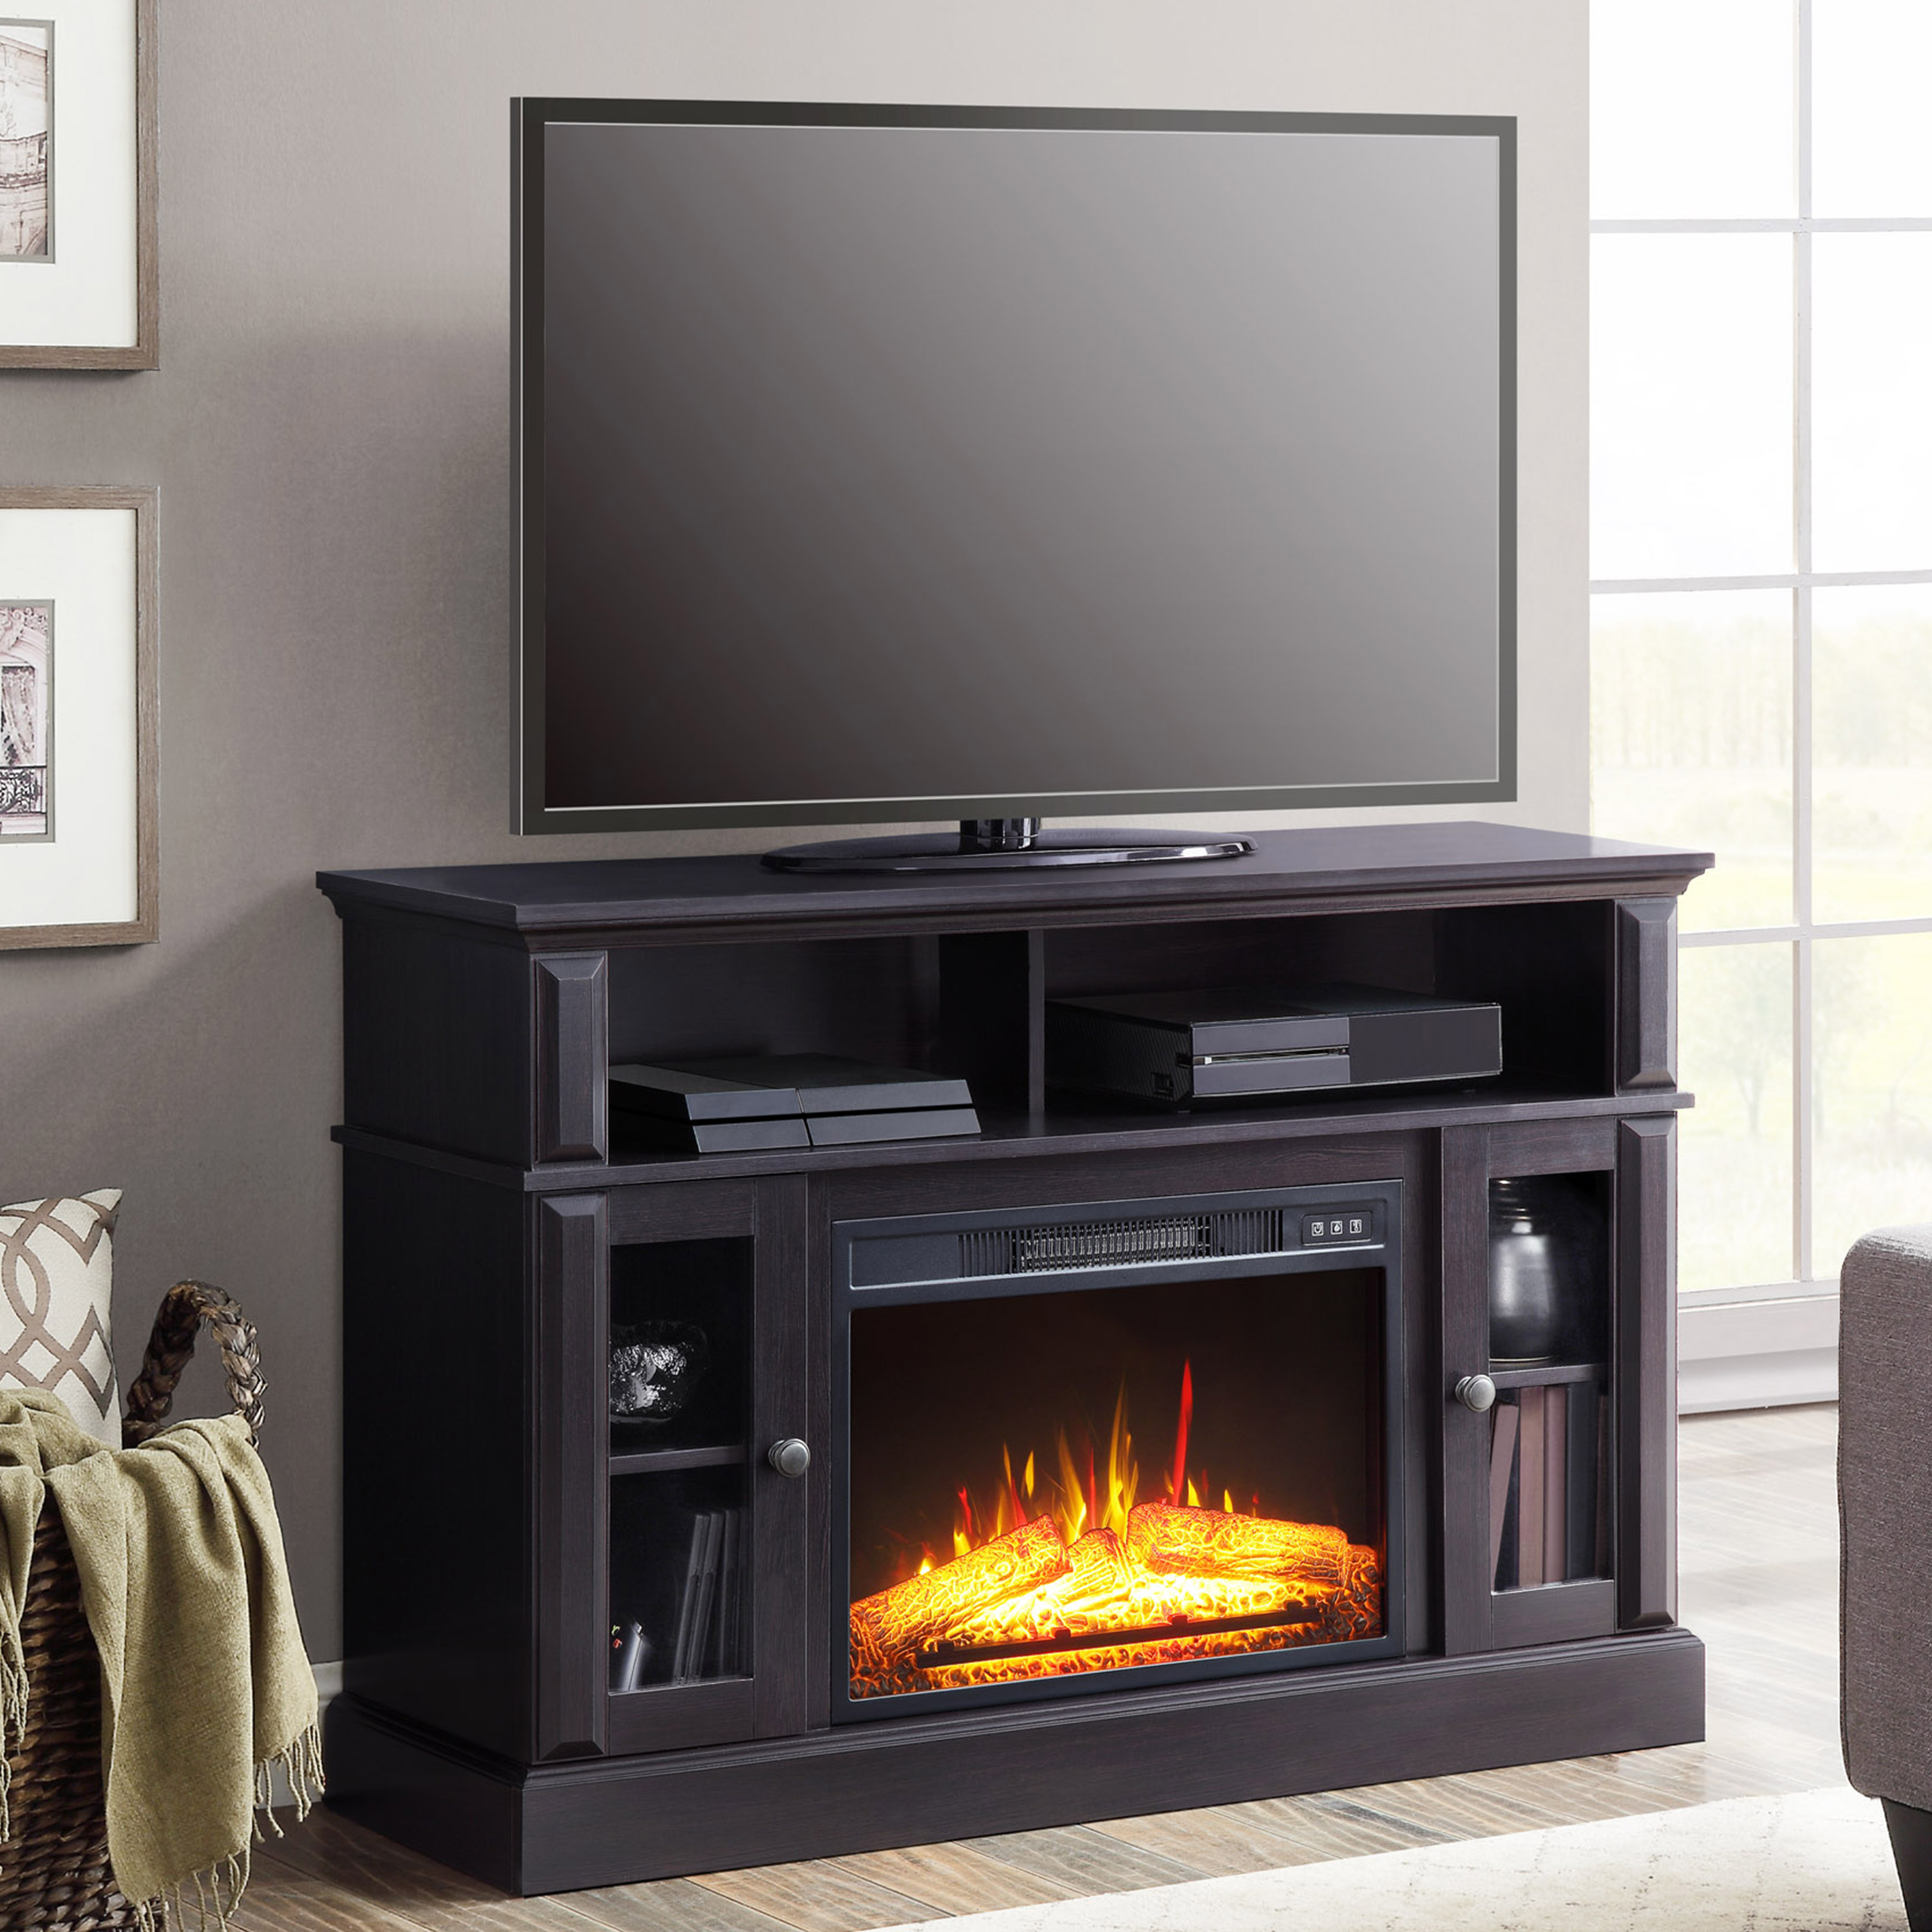 Whalen Barston Media Fireplace Console for TV's up to 55”, Espresso Finish - image 1 of 11